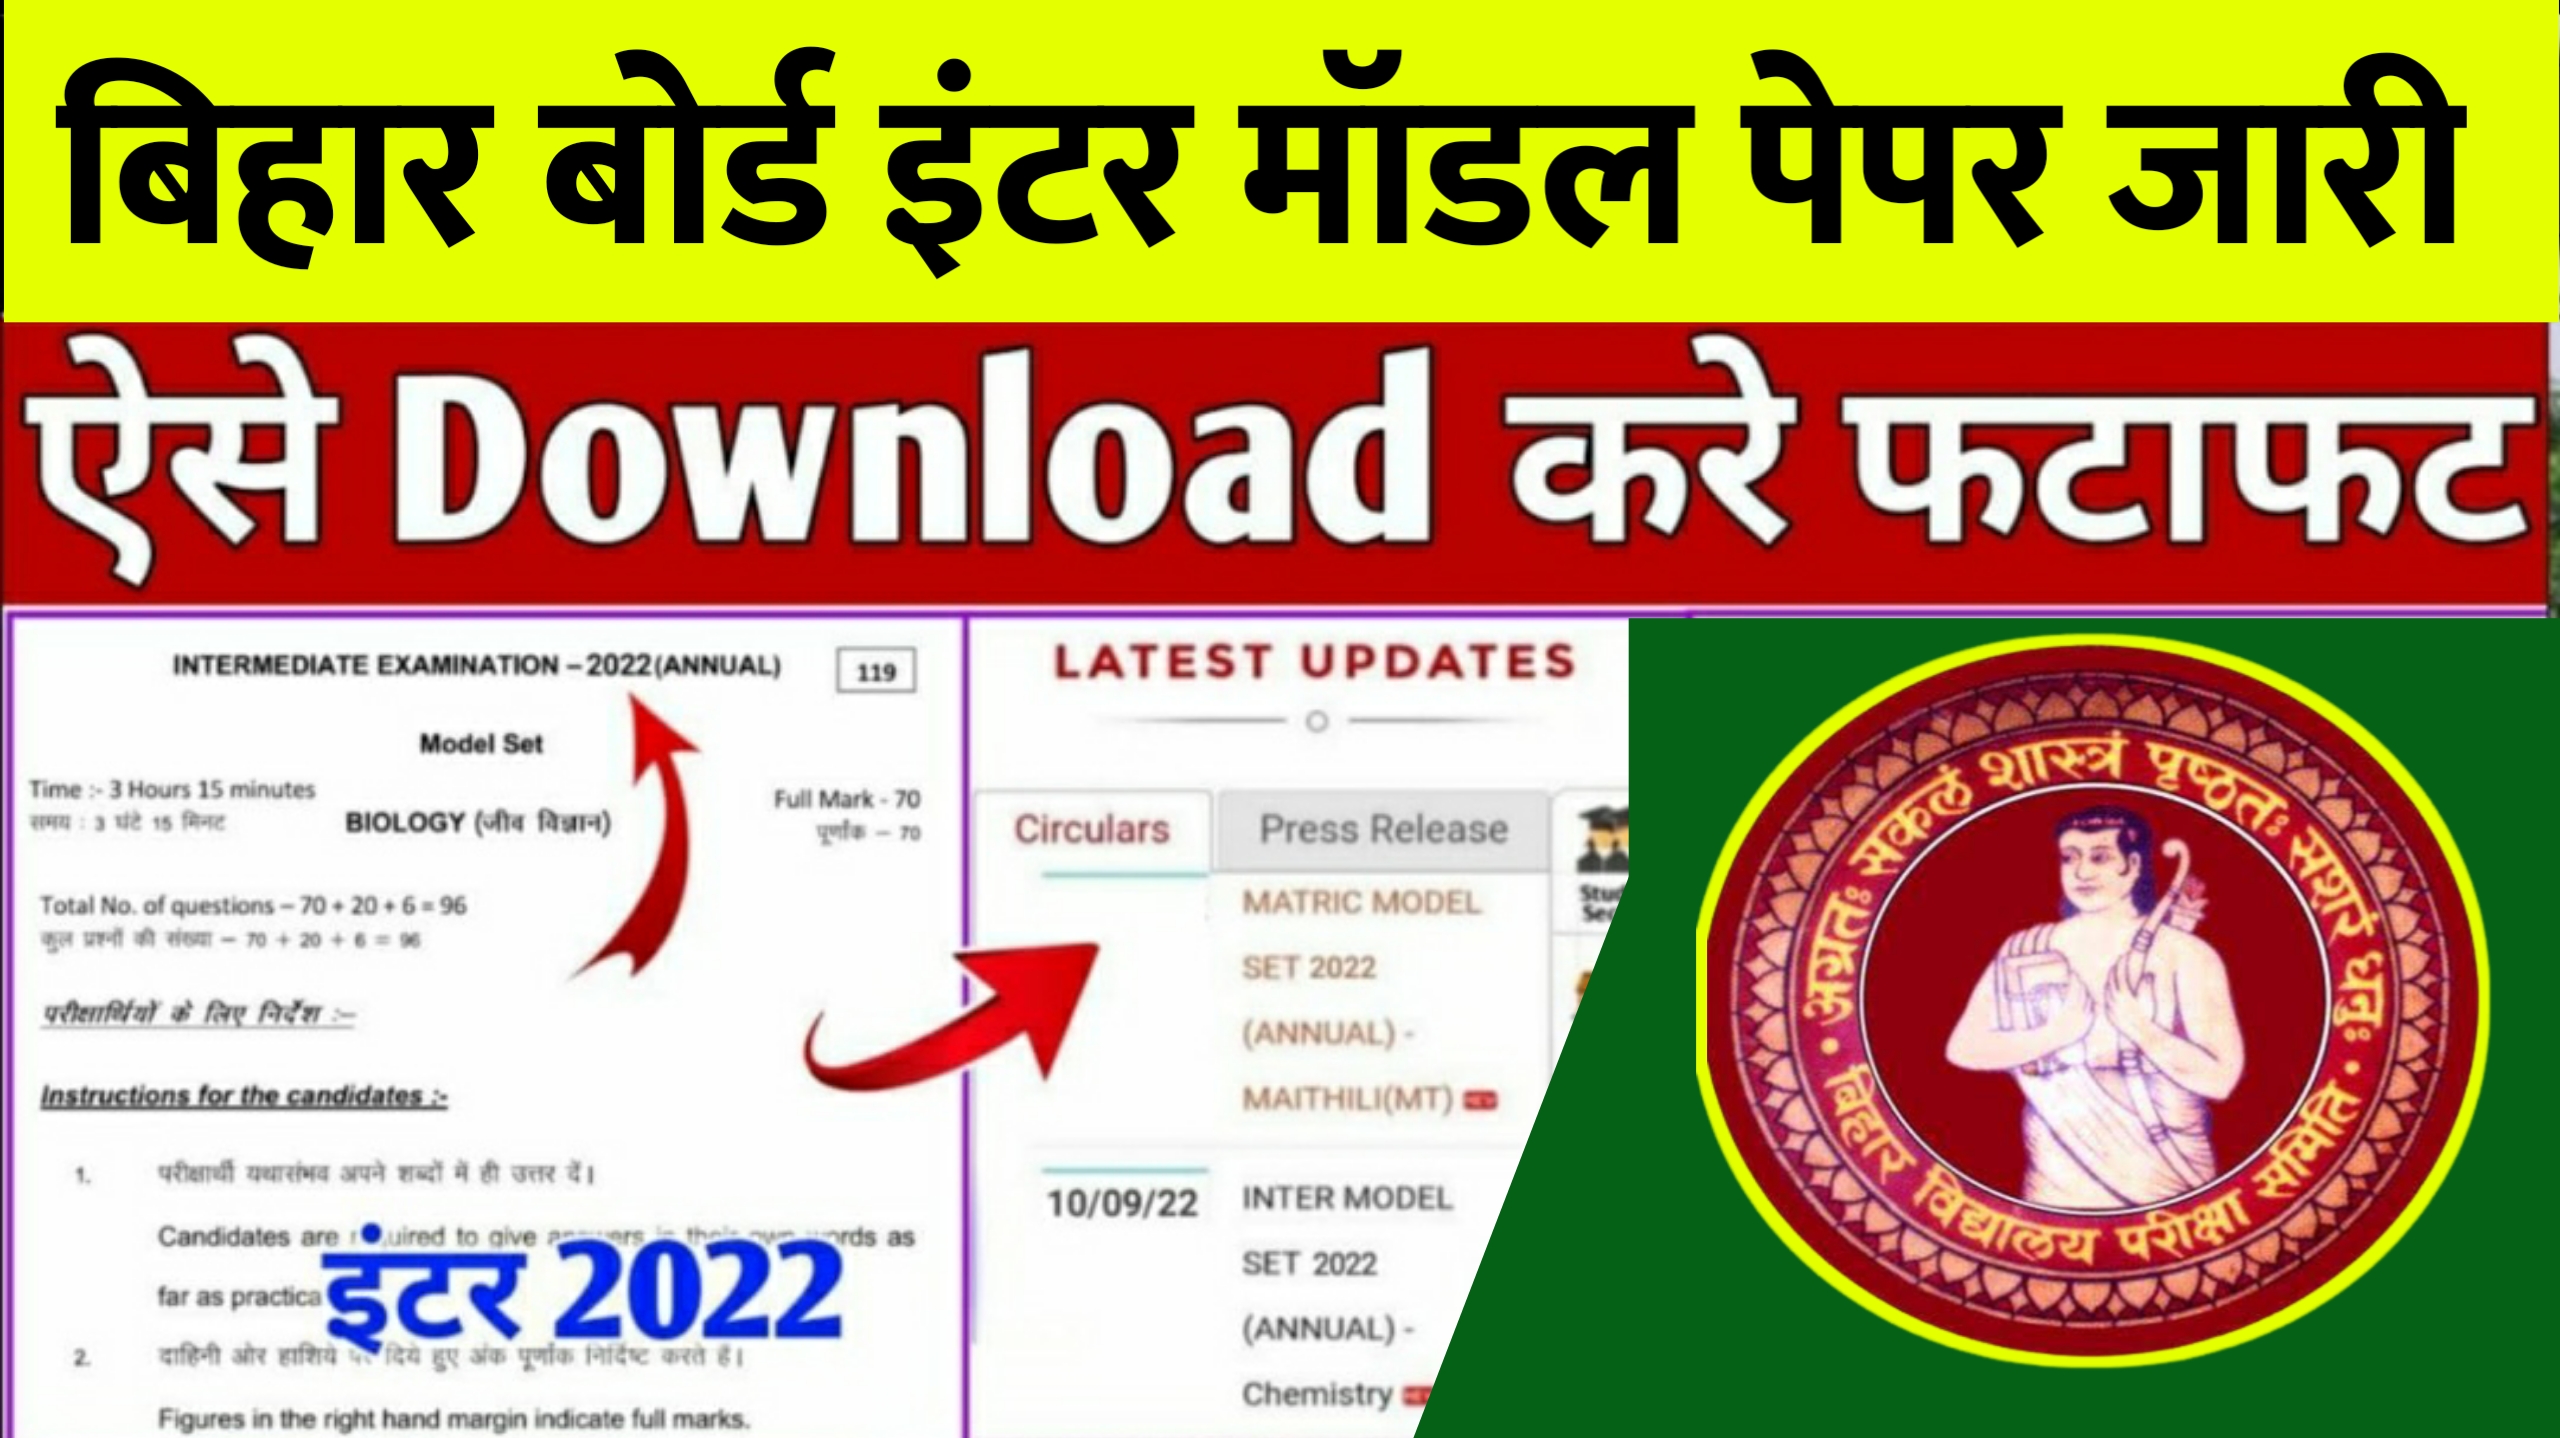 Bihar Board 12th Model Paper 2022 Pdf Download | Bseb Inter Model Paper 2022 All Subject Pdf Out